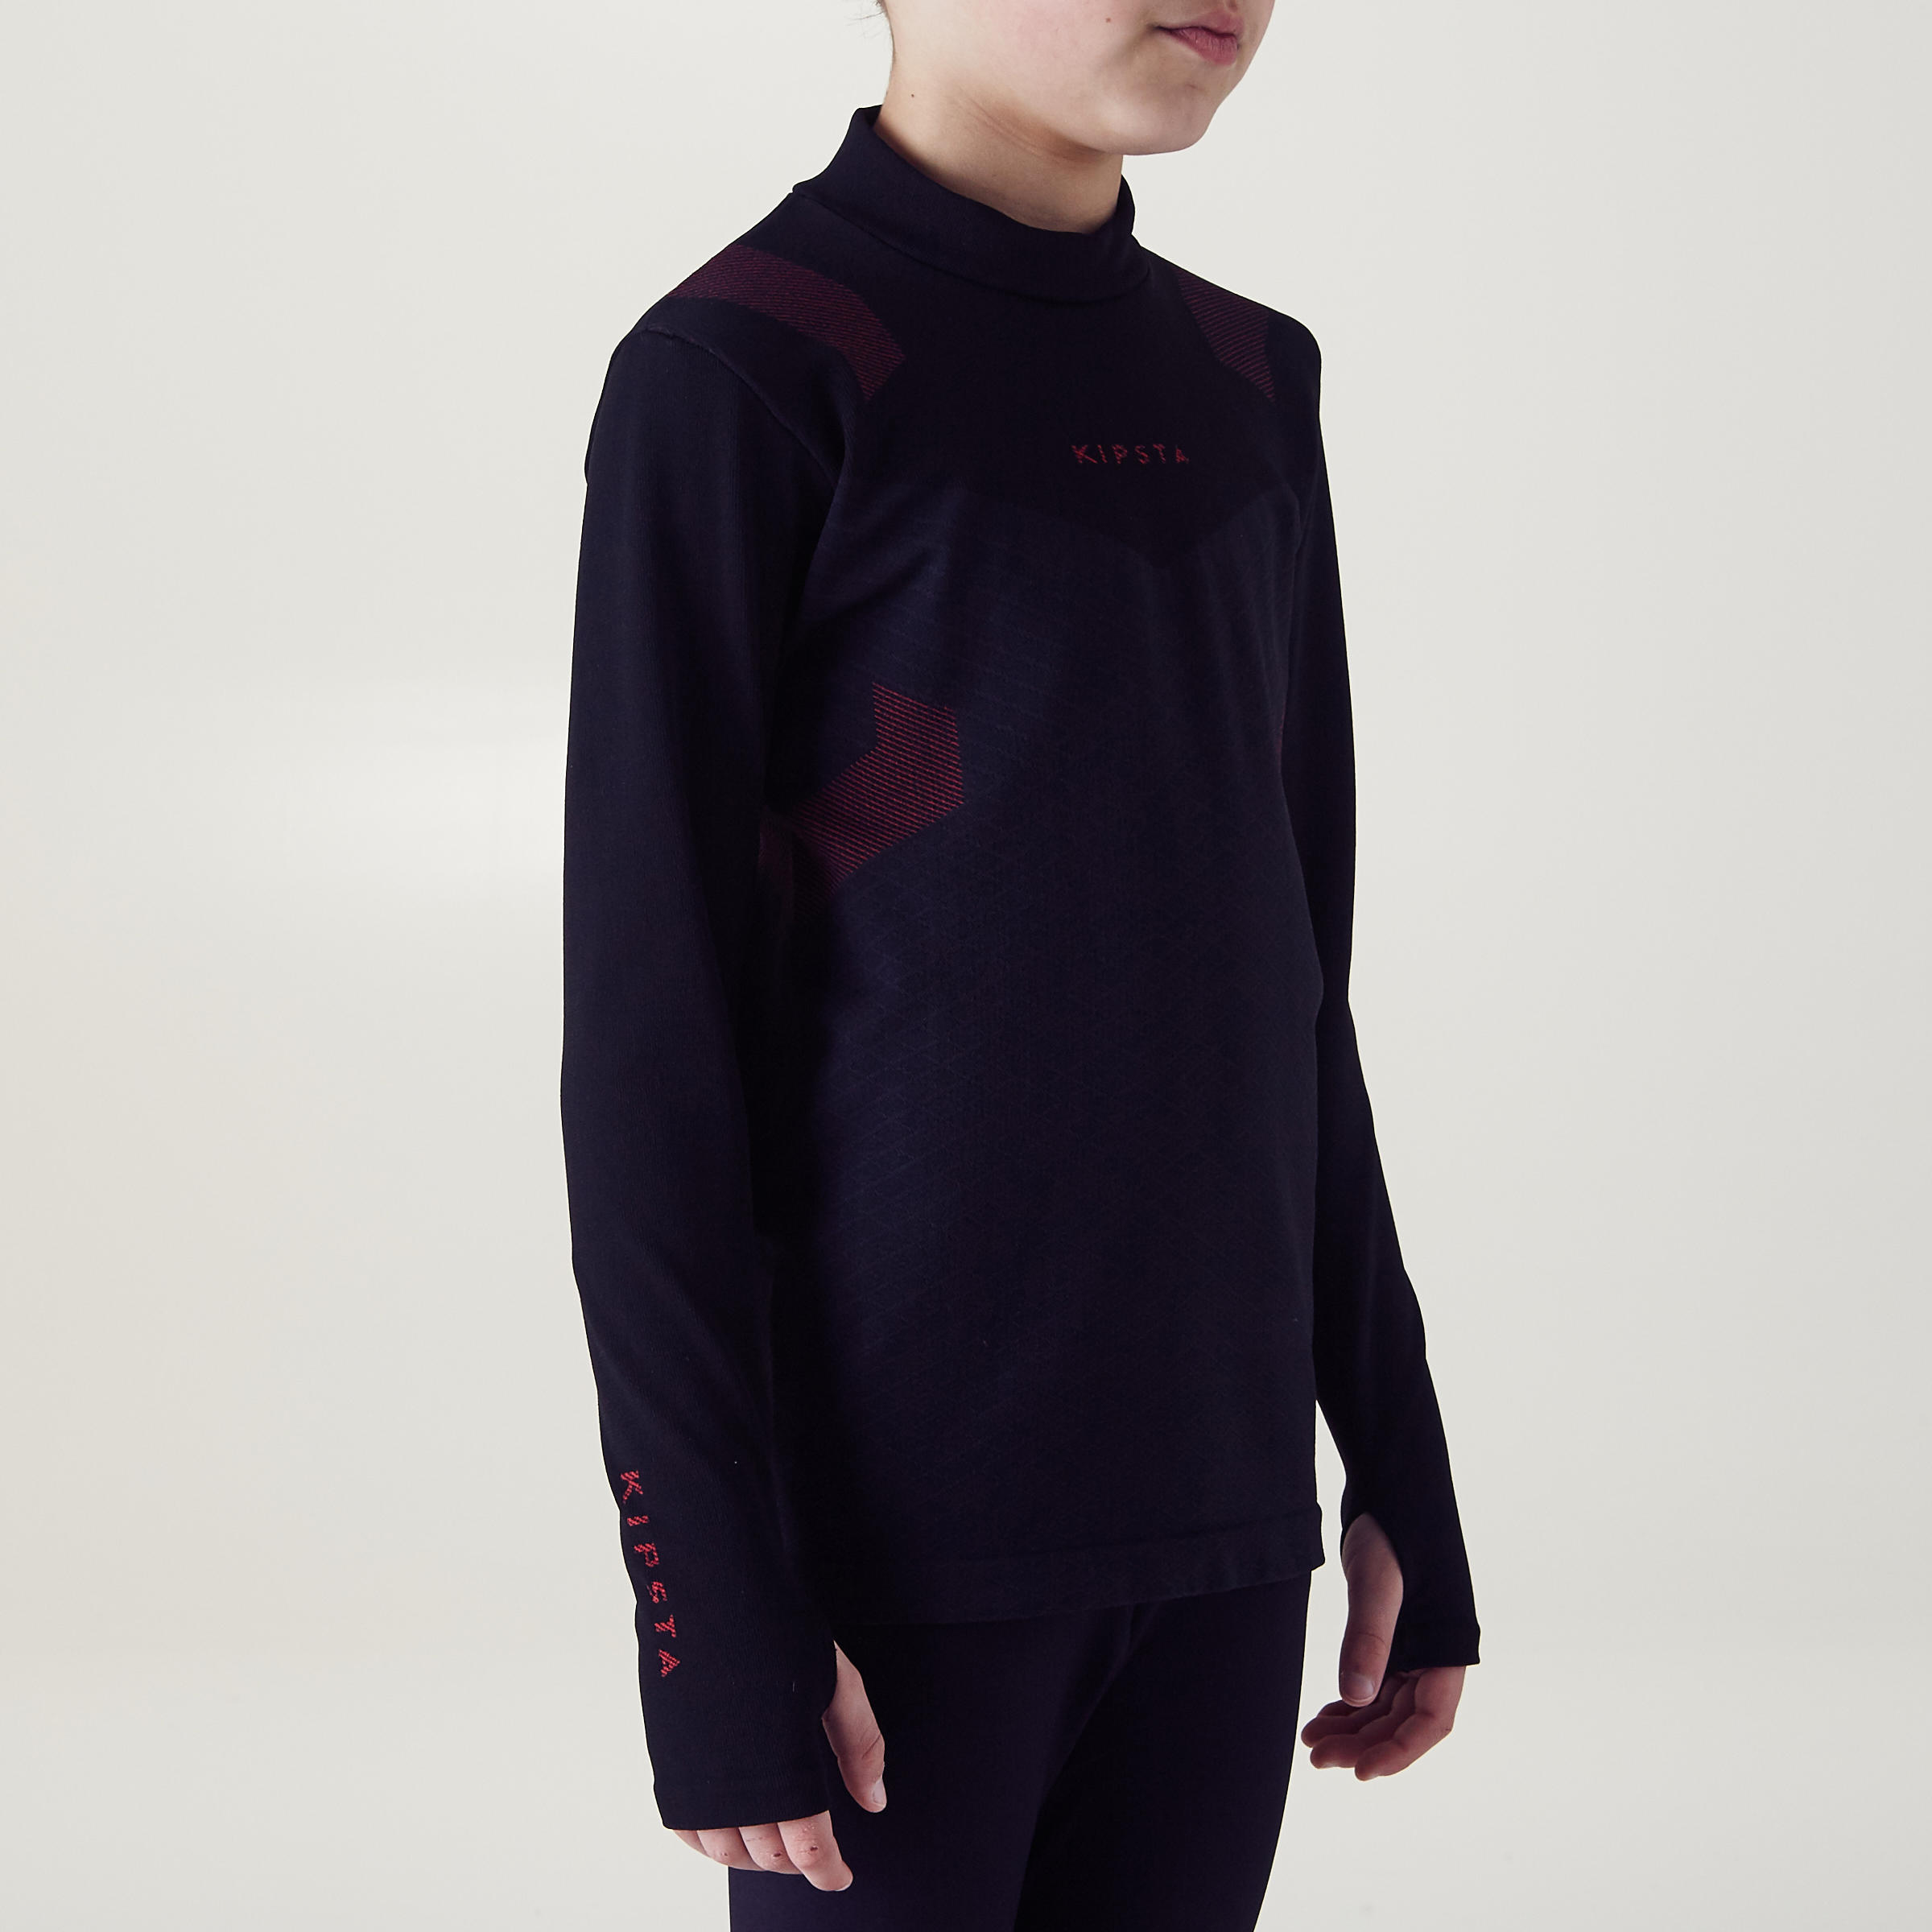 Keepdry 900 Kids' Warm Breathable Long-Sleeved Base Layer - Black/Red 3/11